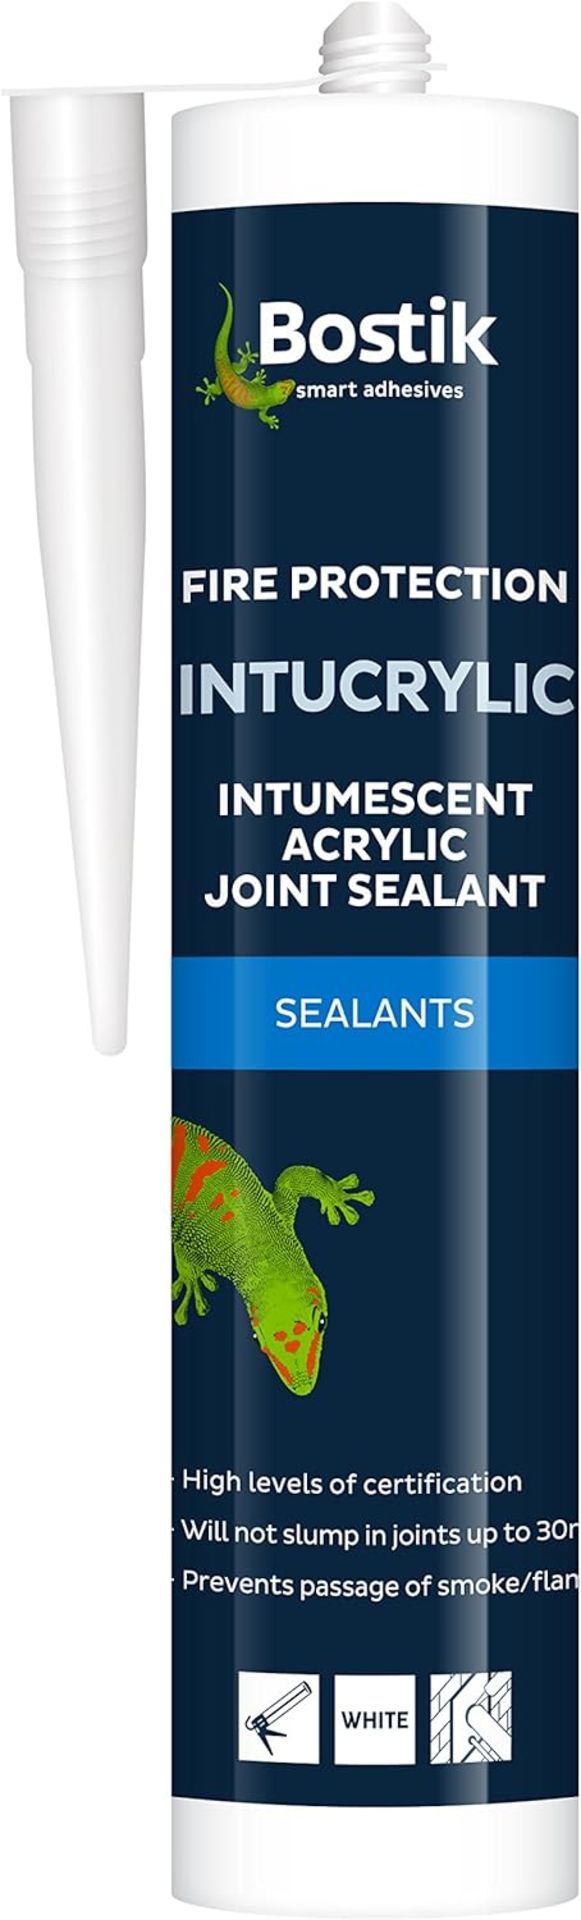 TRADE LOT TO CONTAIN 100x BRAND NEW BOSTIK Fire protection Intucrylic Joint Sealant 290ml. RRP £9.79